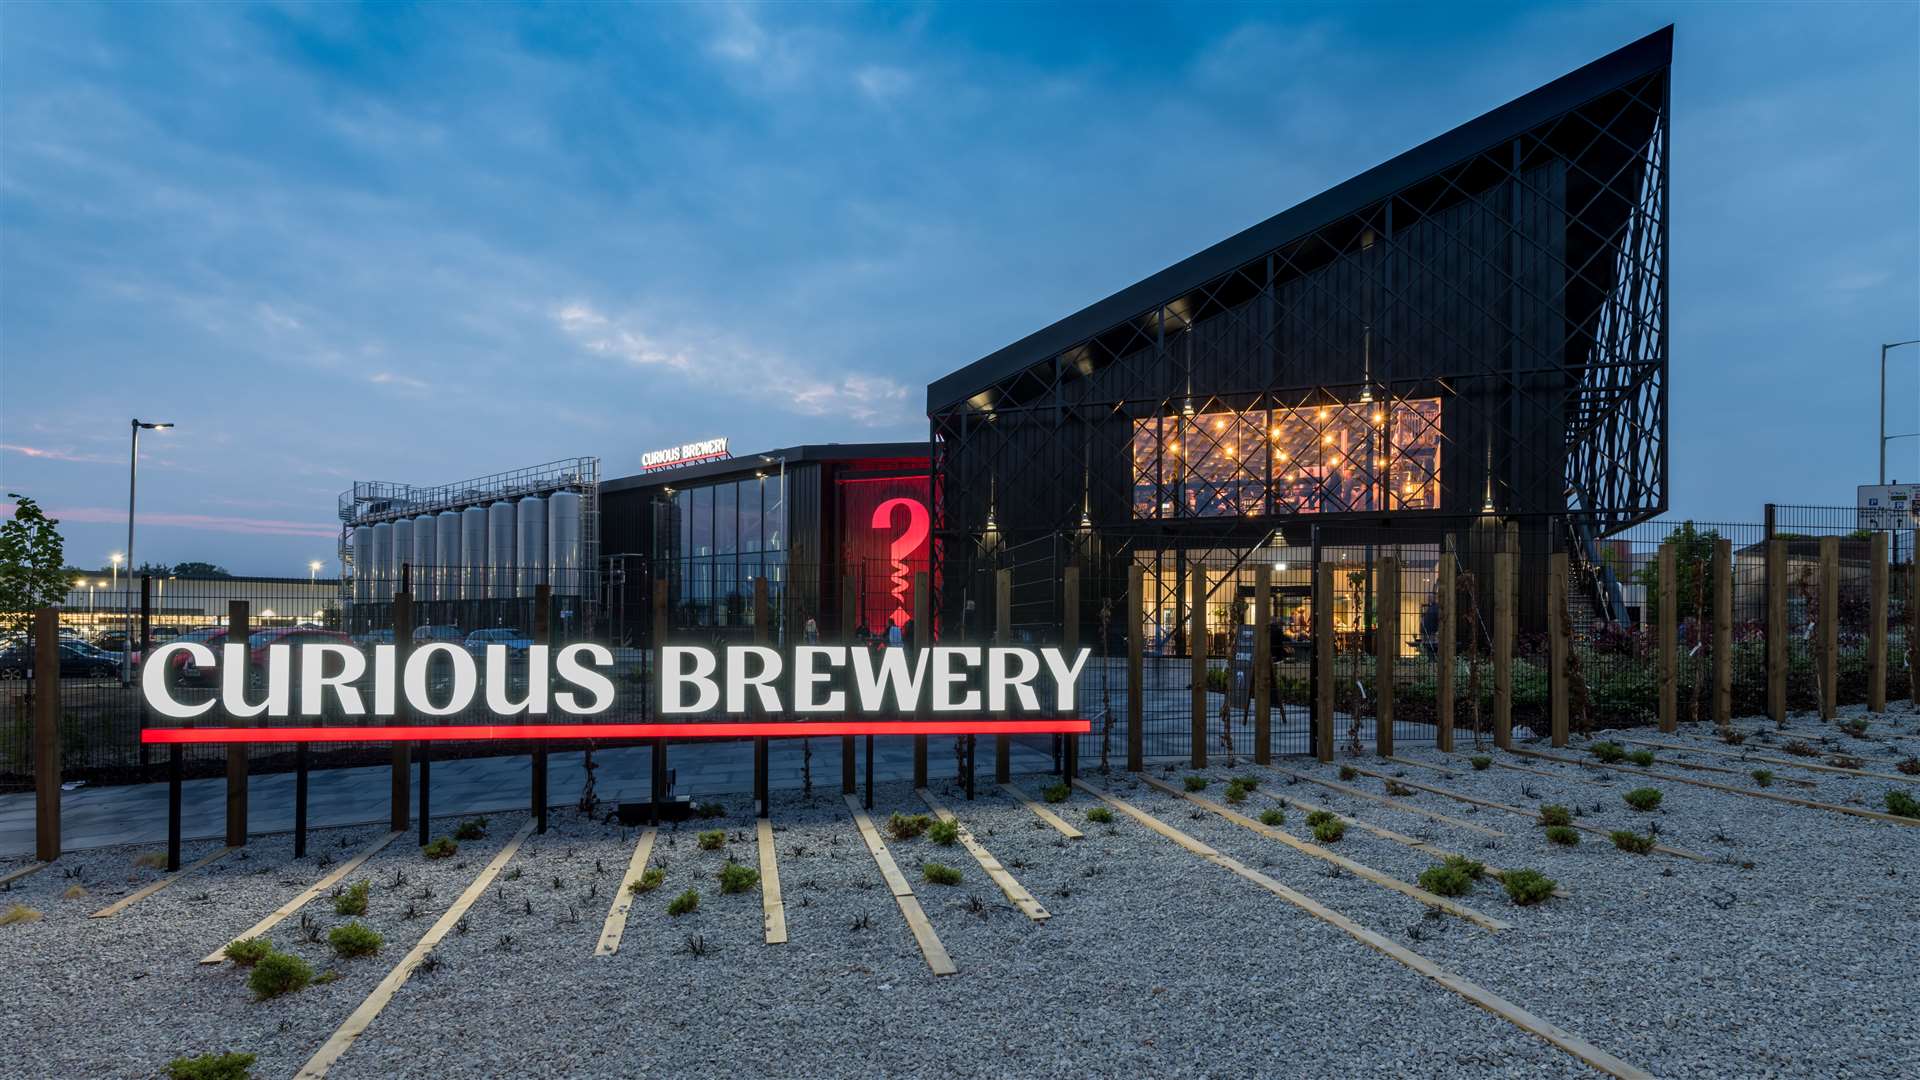 The Curious Brewery in Ashford is proving a hit since its opening last May